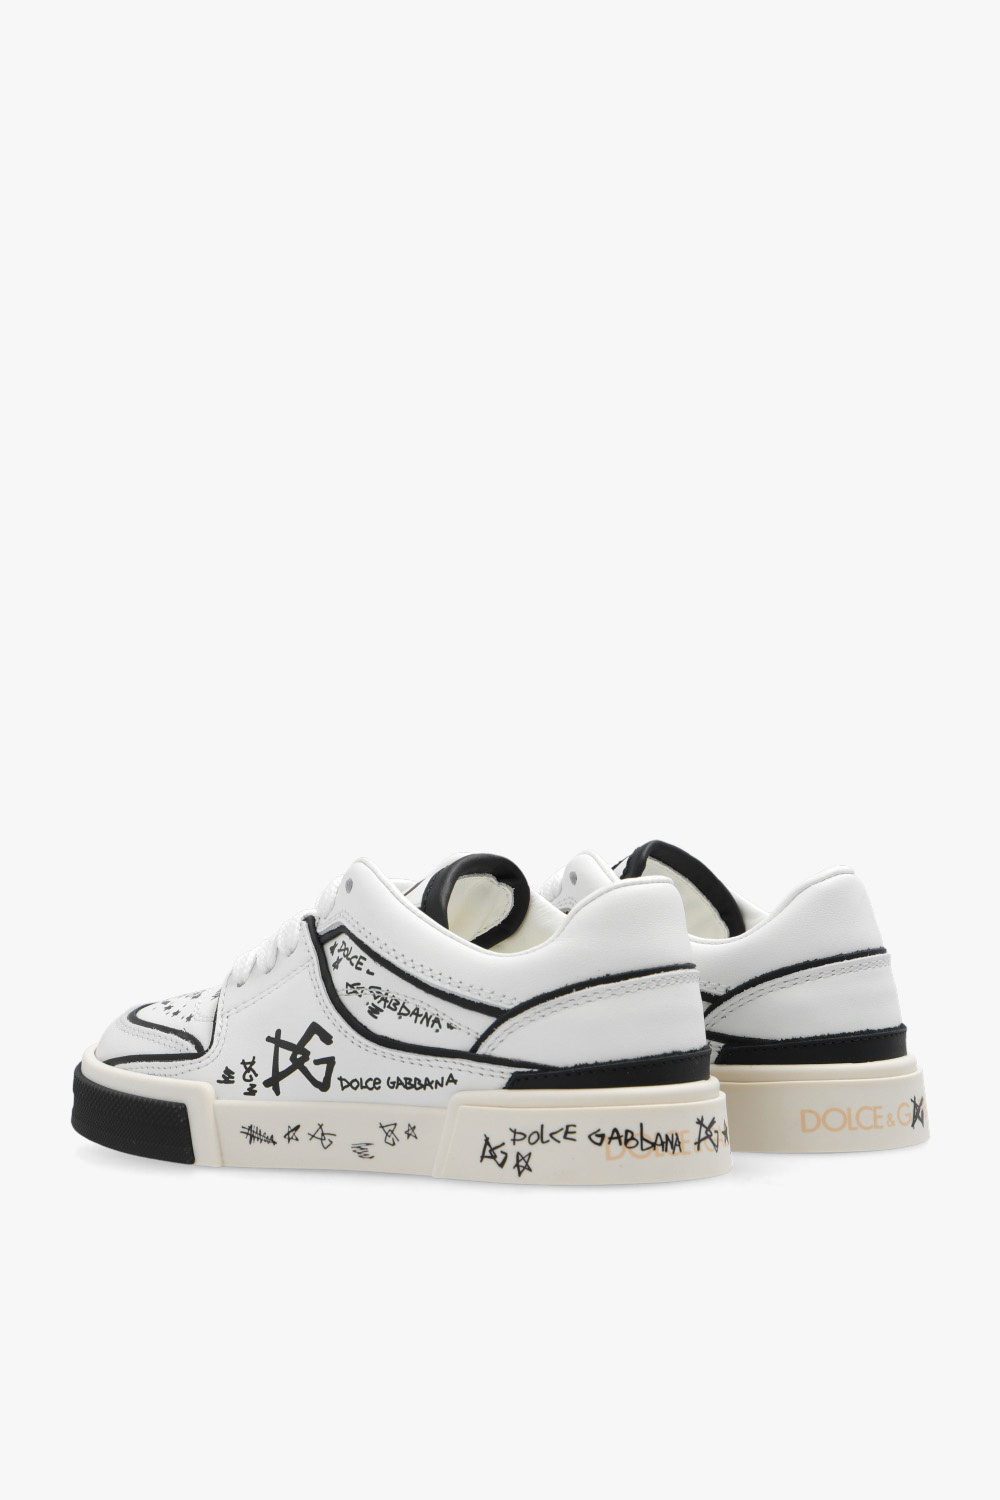 dolce Baby & Gabbana Kids Patterned sneakers